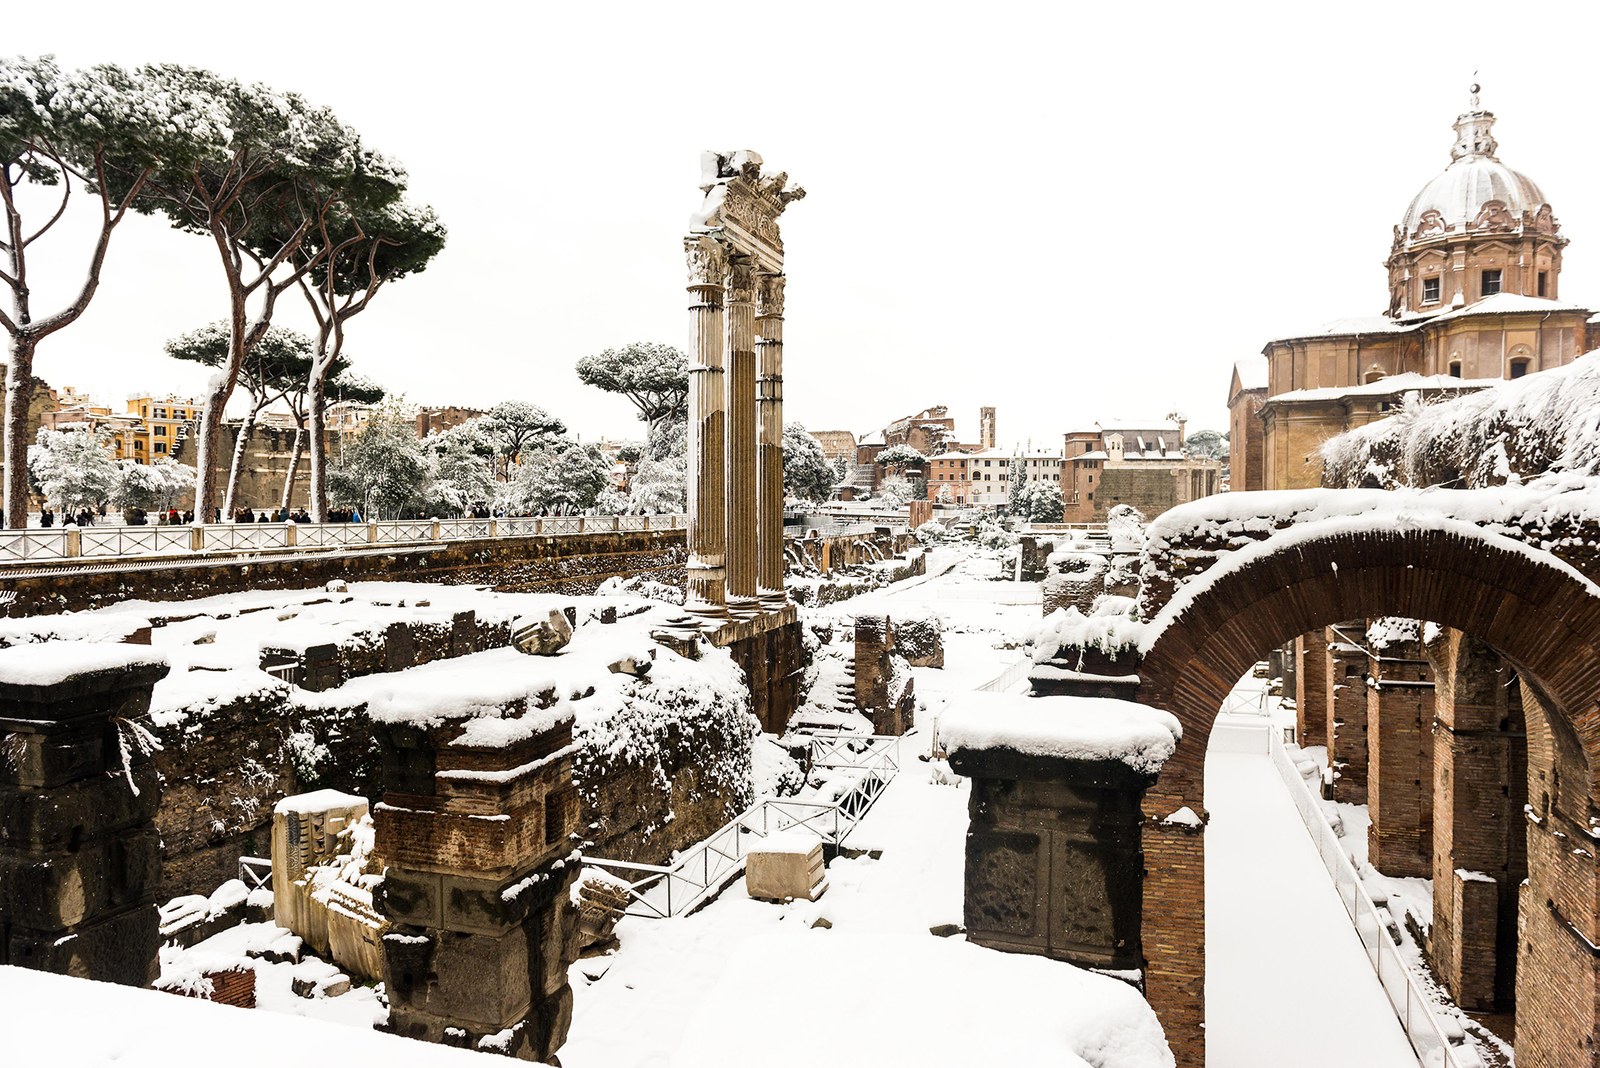 02-snow-in-rome-italy-first-time-in-six-years-2018.jpg